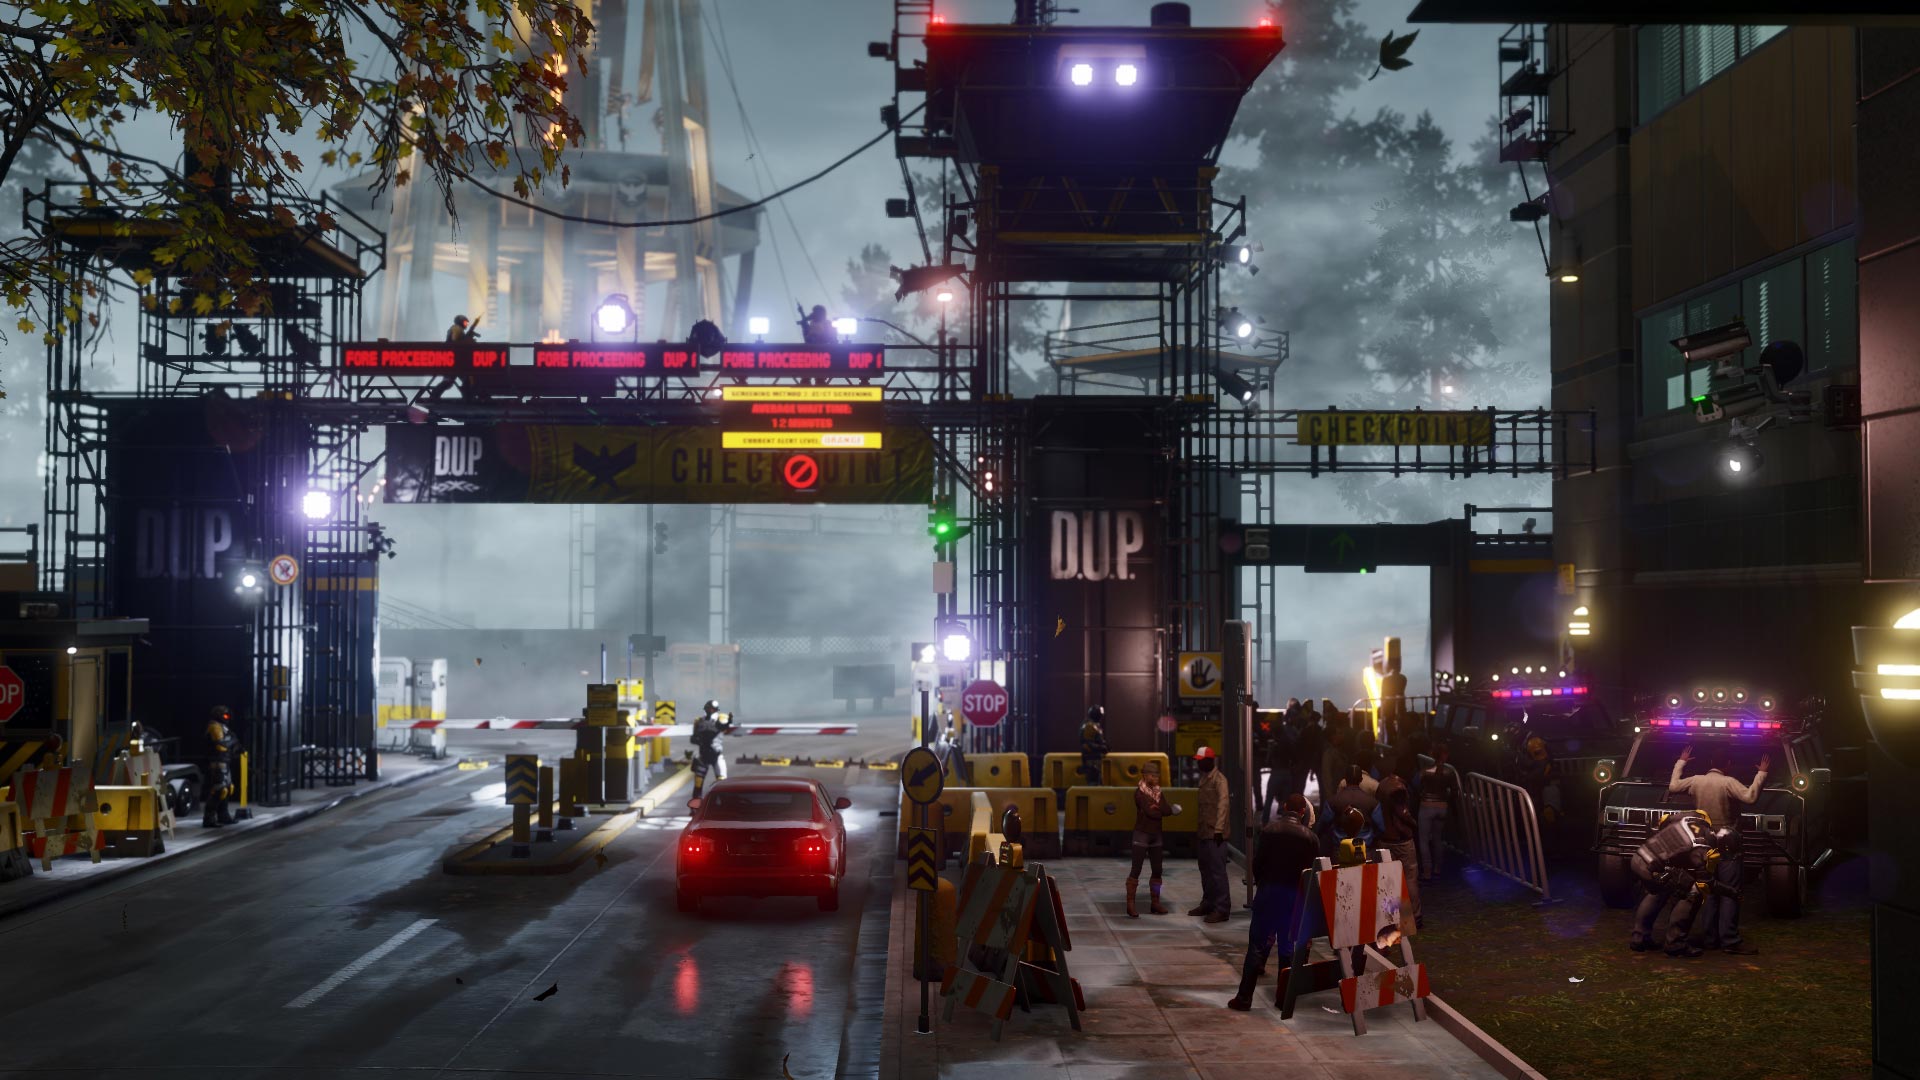 infamous second son release date